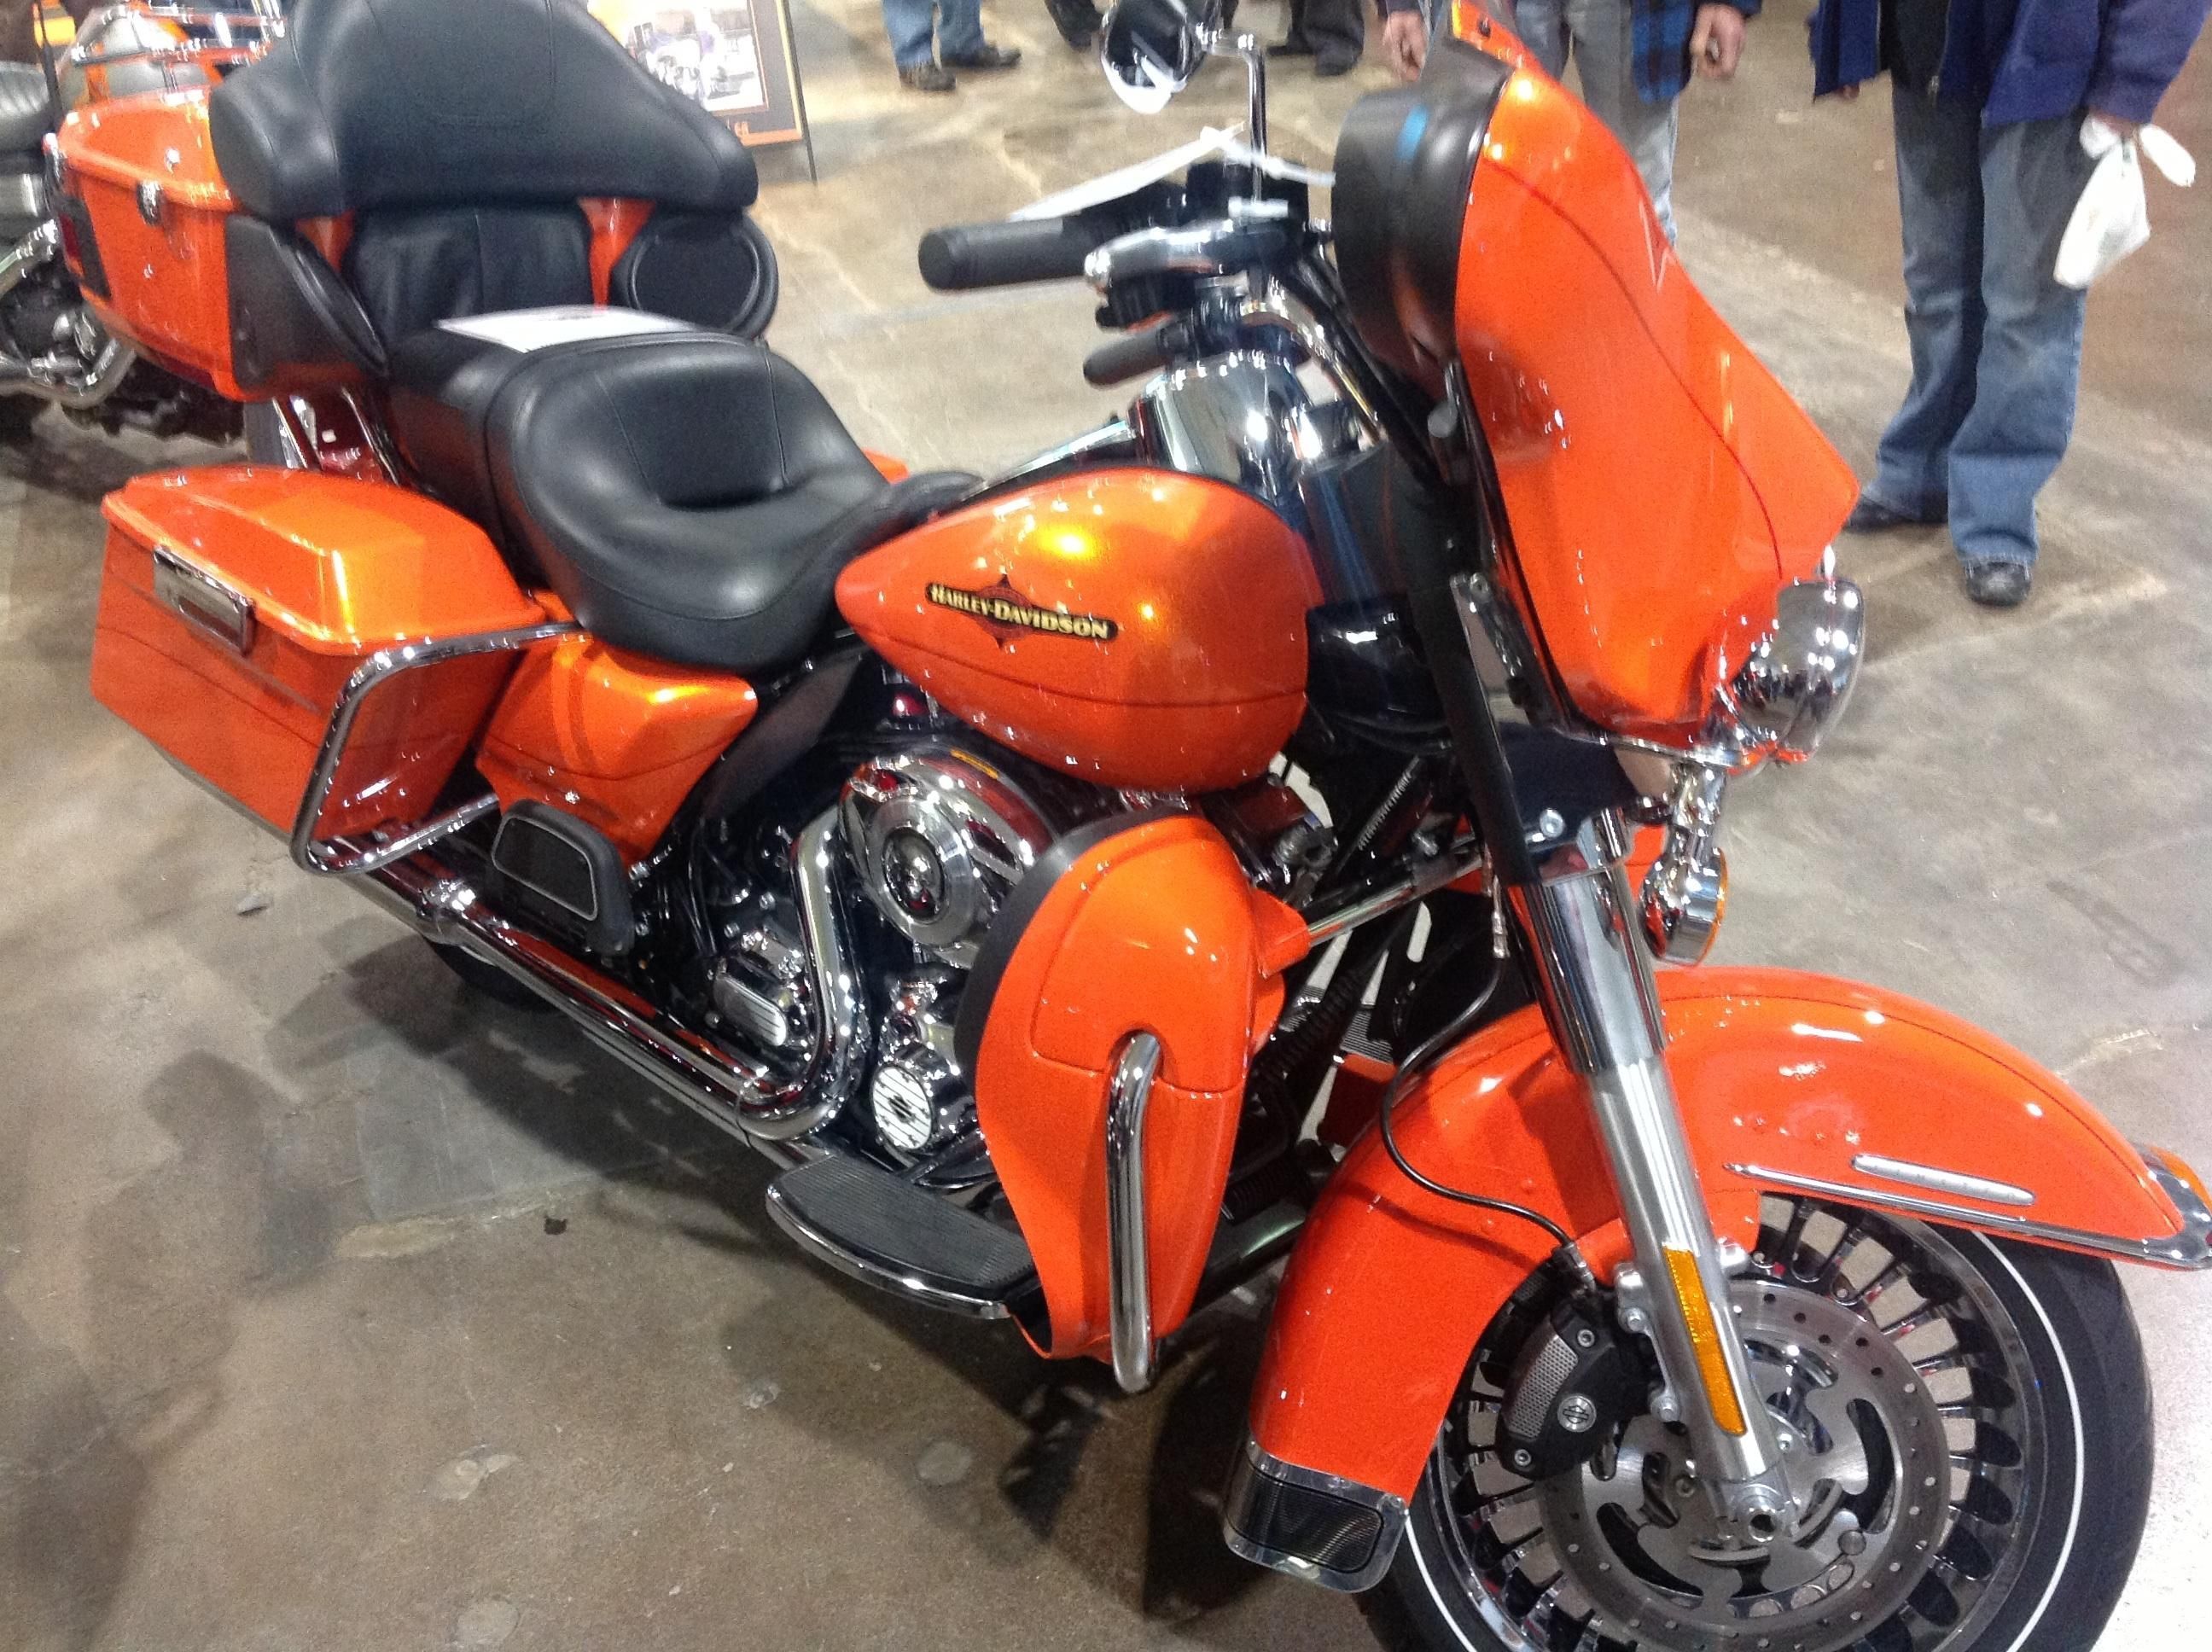 Harley at the Spring Motorcycle Show